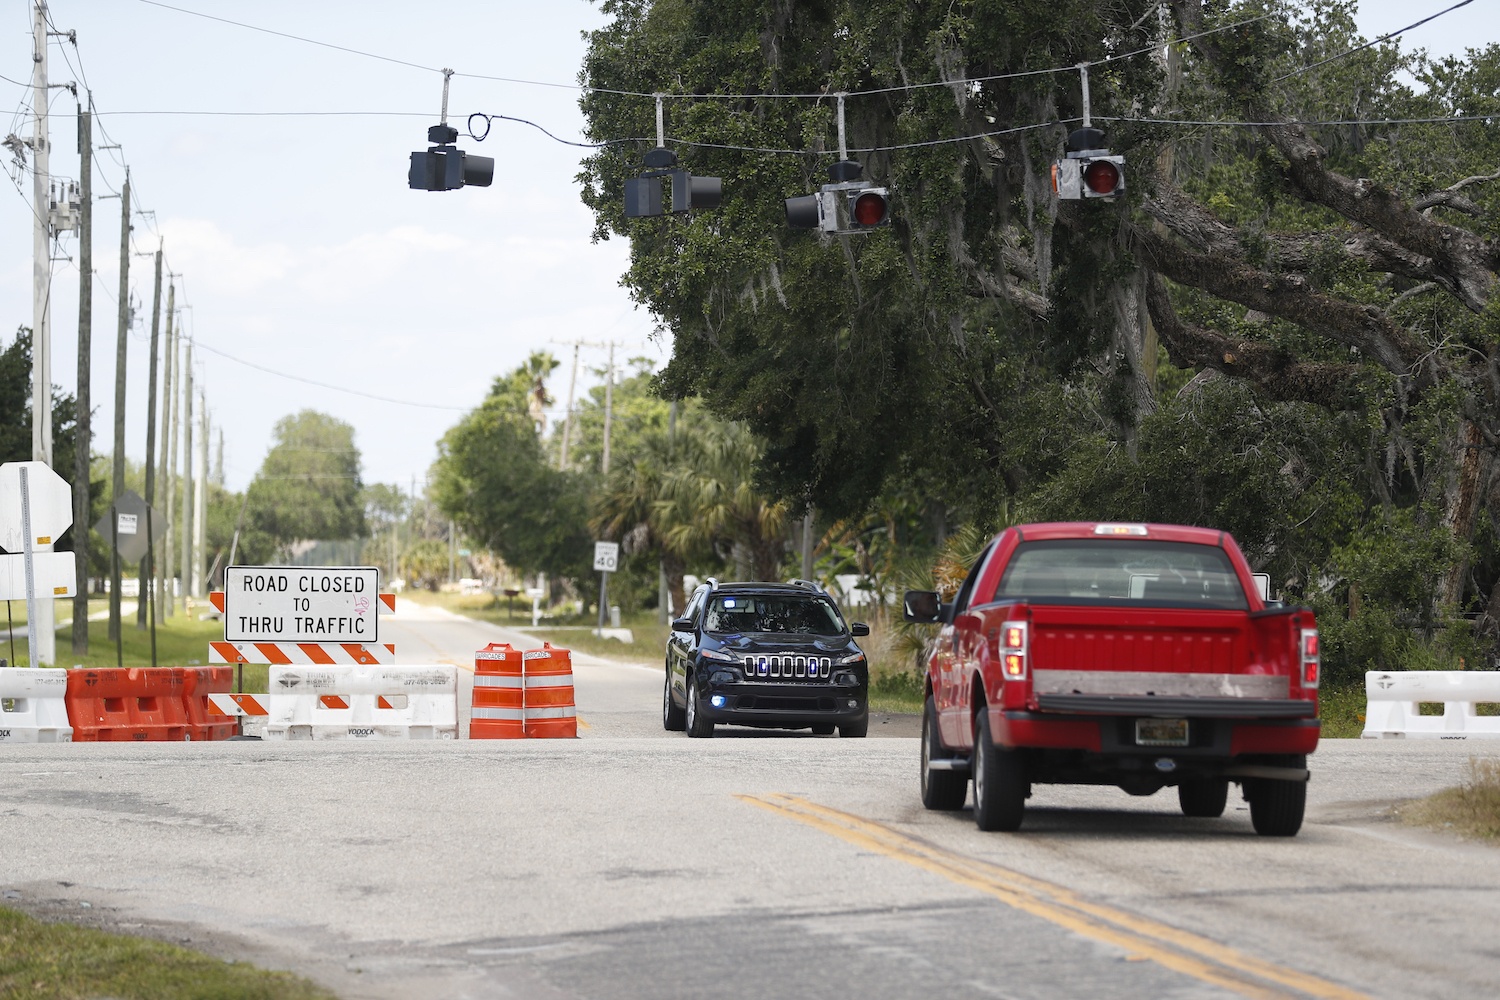 Road closures are seen at Moccasin Wallow Road due to a possible wastewater breach at the former Piney Point phosphate plant on April 5, 2021 in Gillette, Florida. An evacuation order had been issued, affecting more than 300 homes in the area.